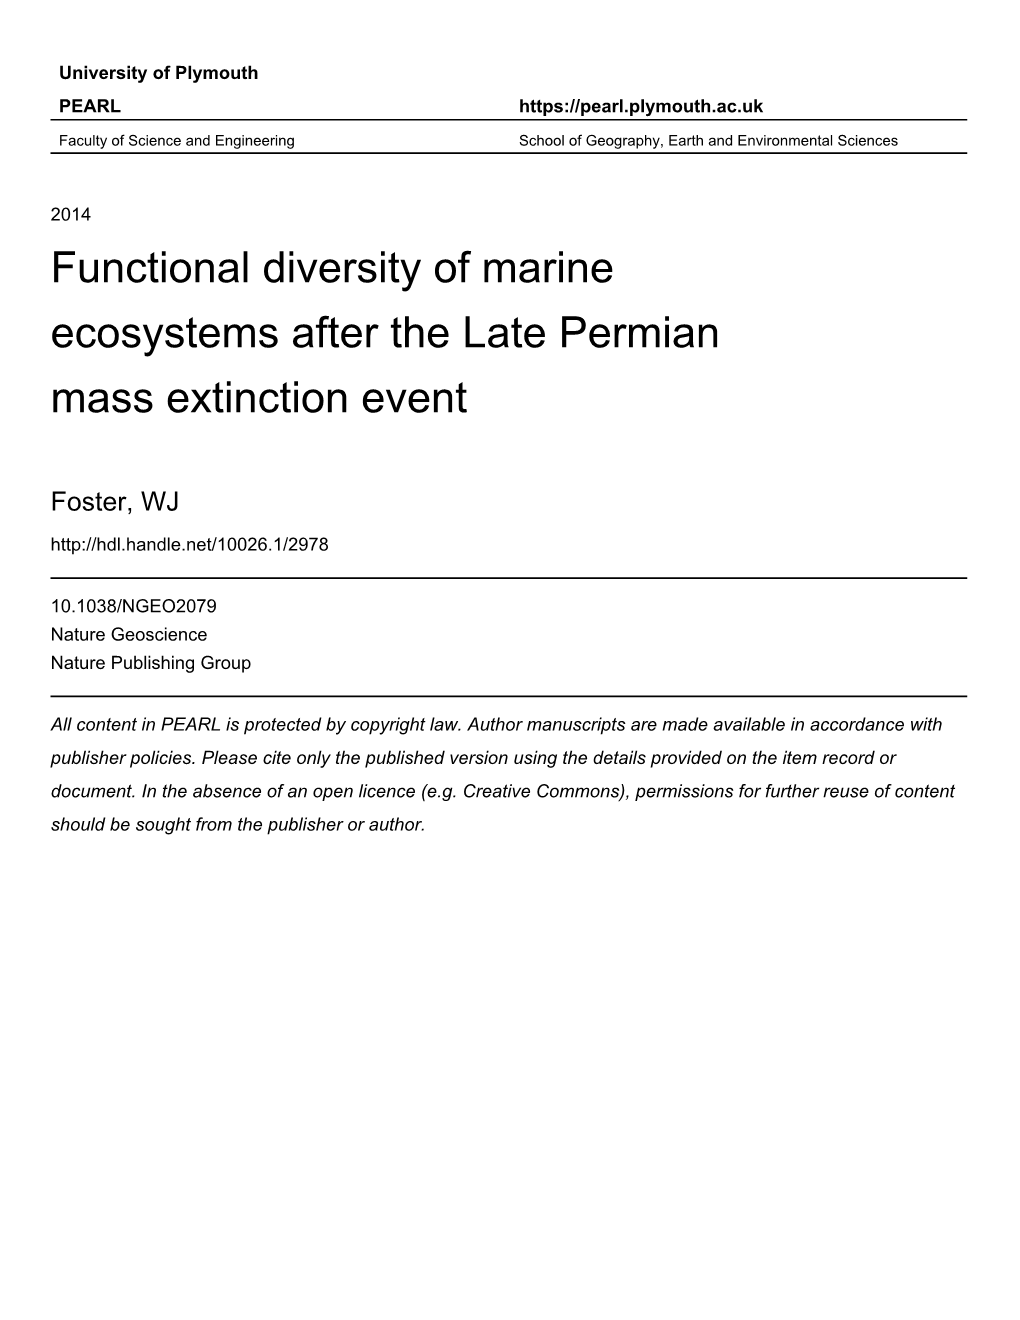 Title: Functional Diversity of Marine Ecosystems After the Late Permian Mass